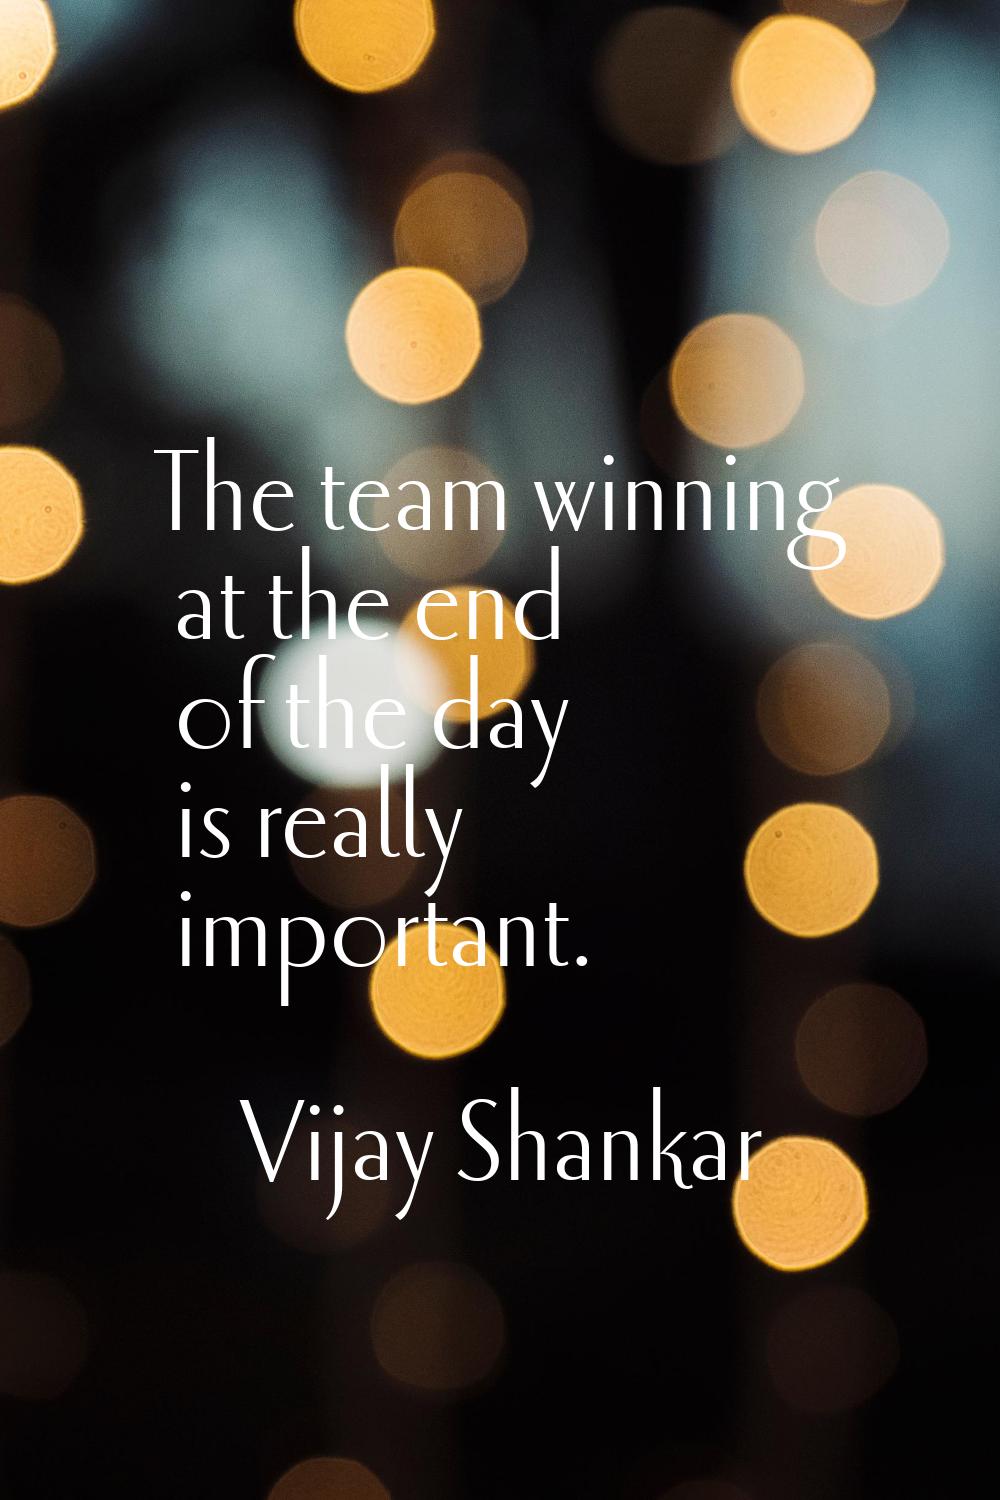 The team winning at the end of the day is really important.